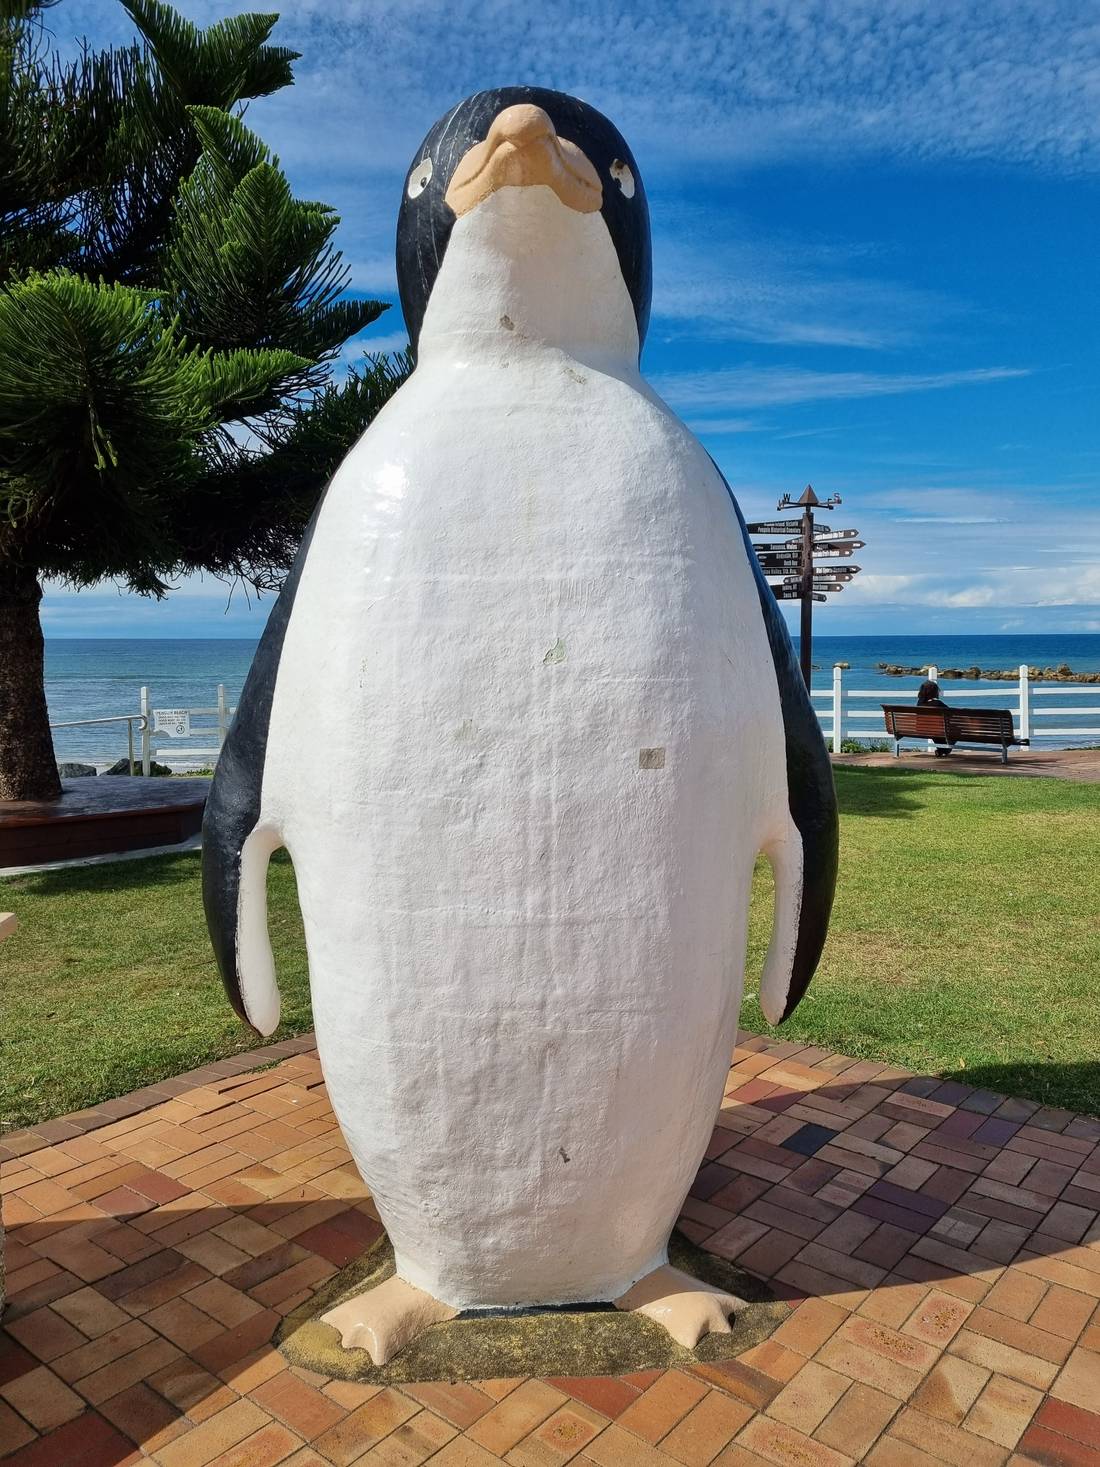 The Big Penguin. Strangely it seems the town was named after the Small Fairy Penguin but nowadays they only visit some well protected Nature Reserves elsewhere on the island. Seems the urban sprawl has scared them away.